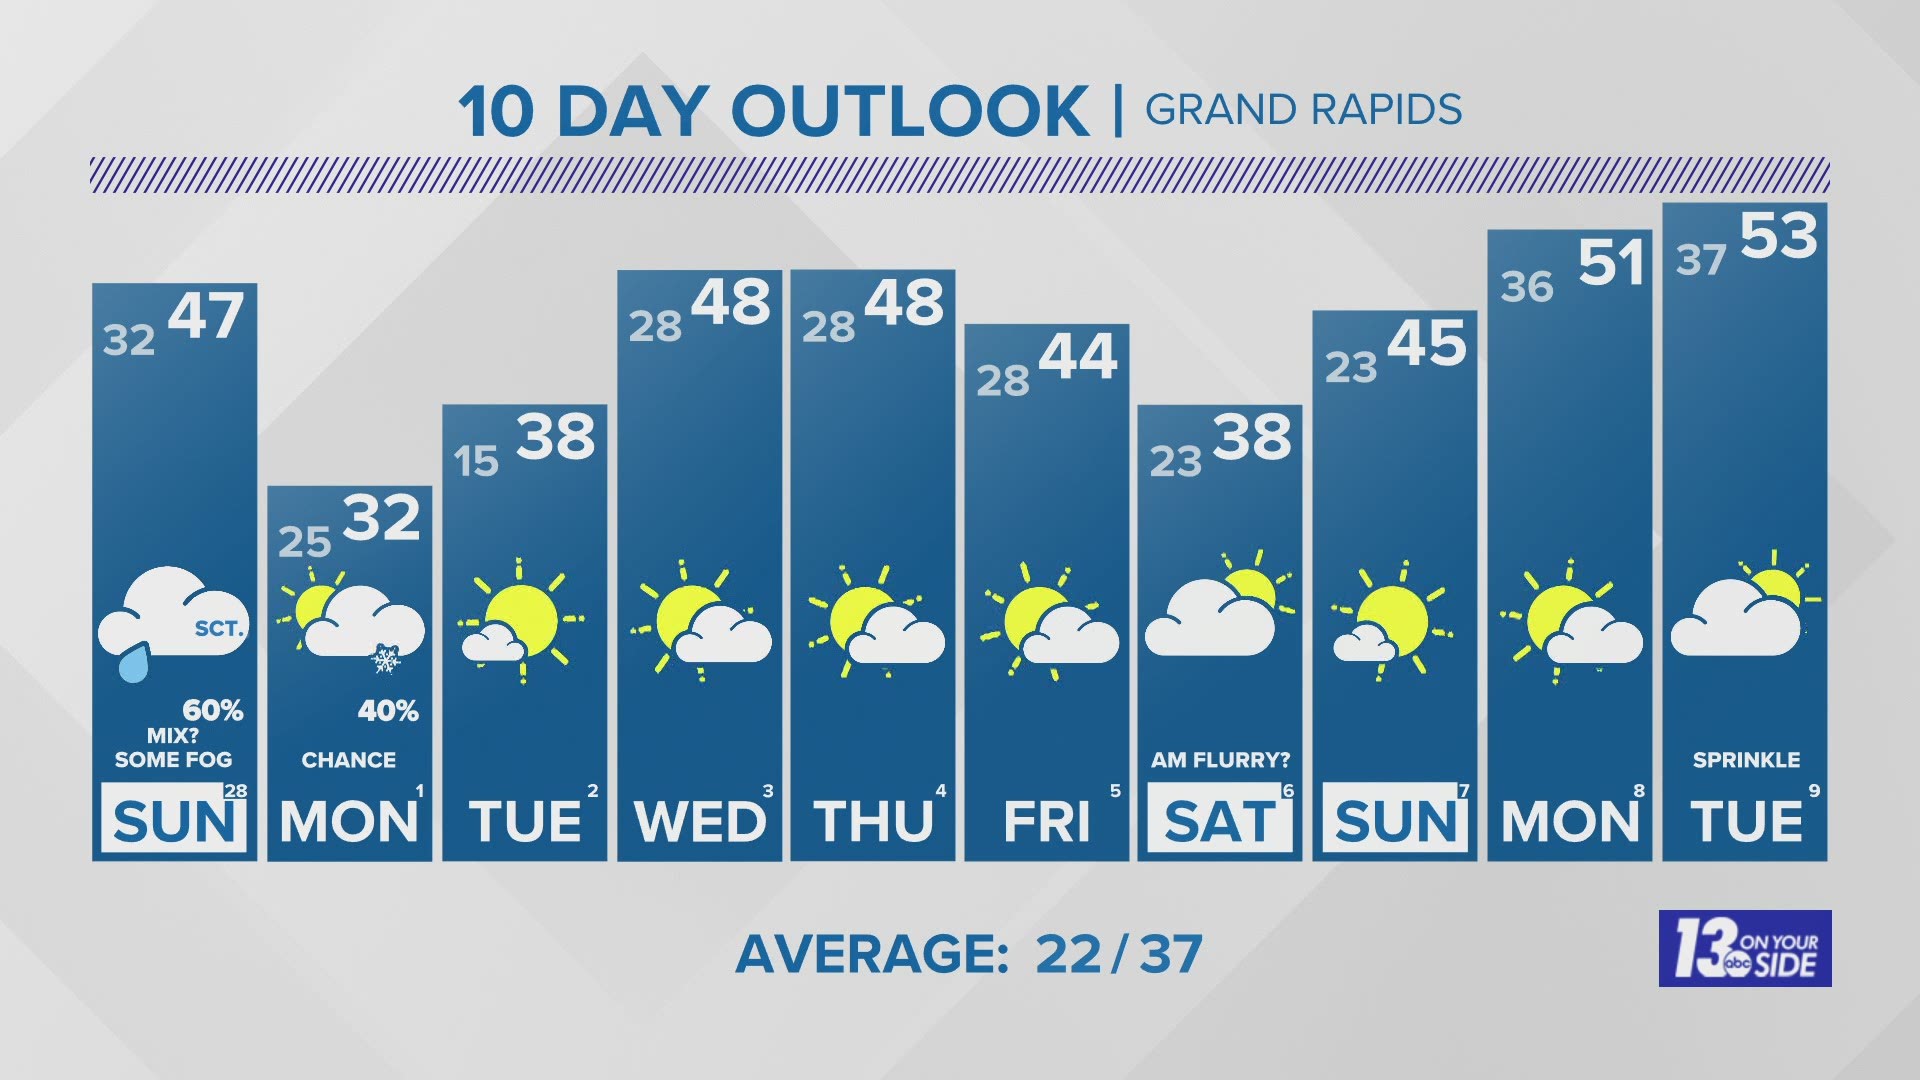 A largely quiet forecast takes over after some rain Sunday and snow Monday.